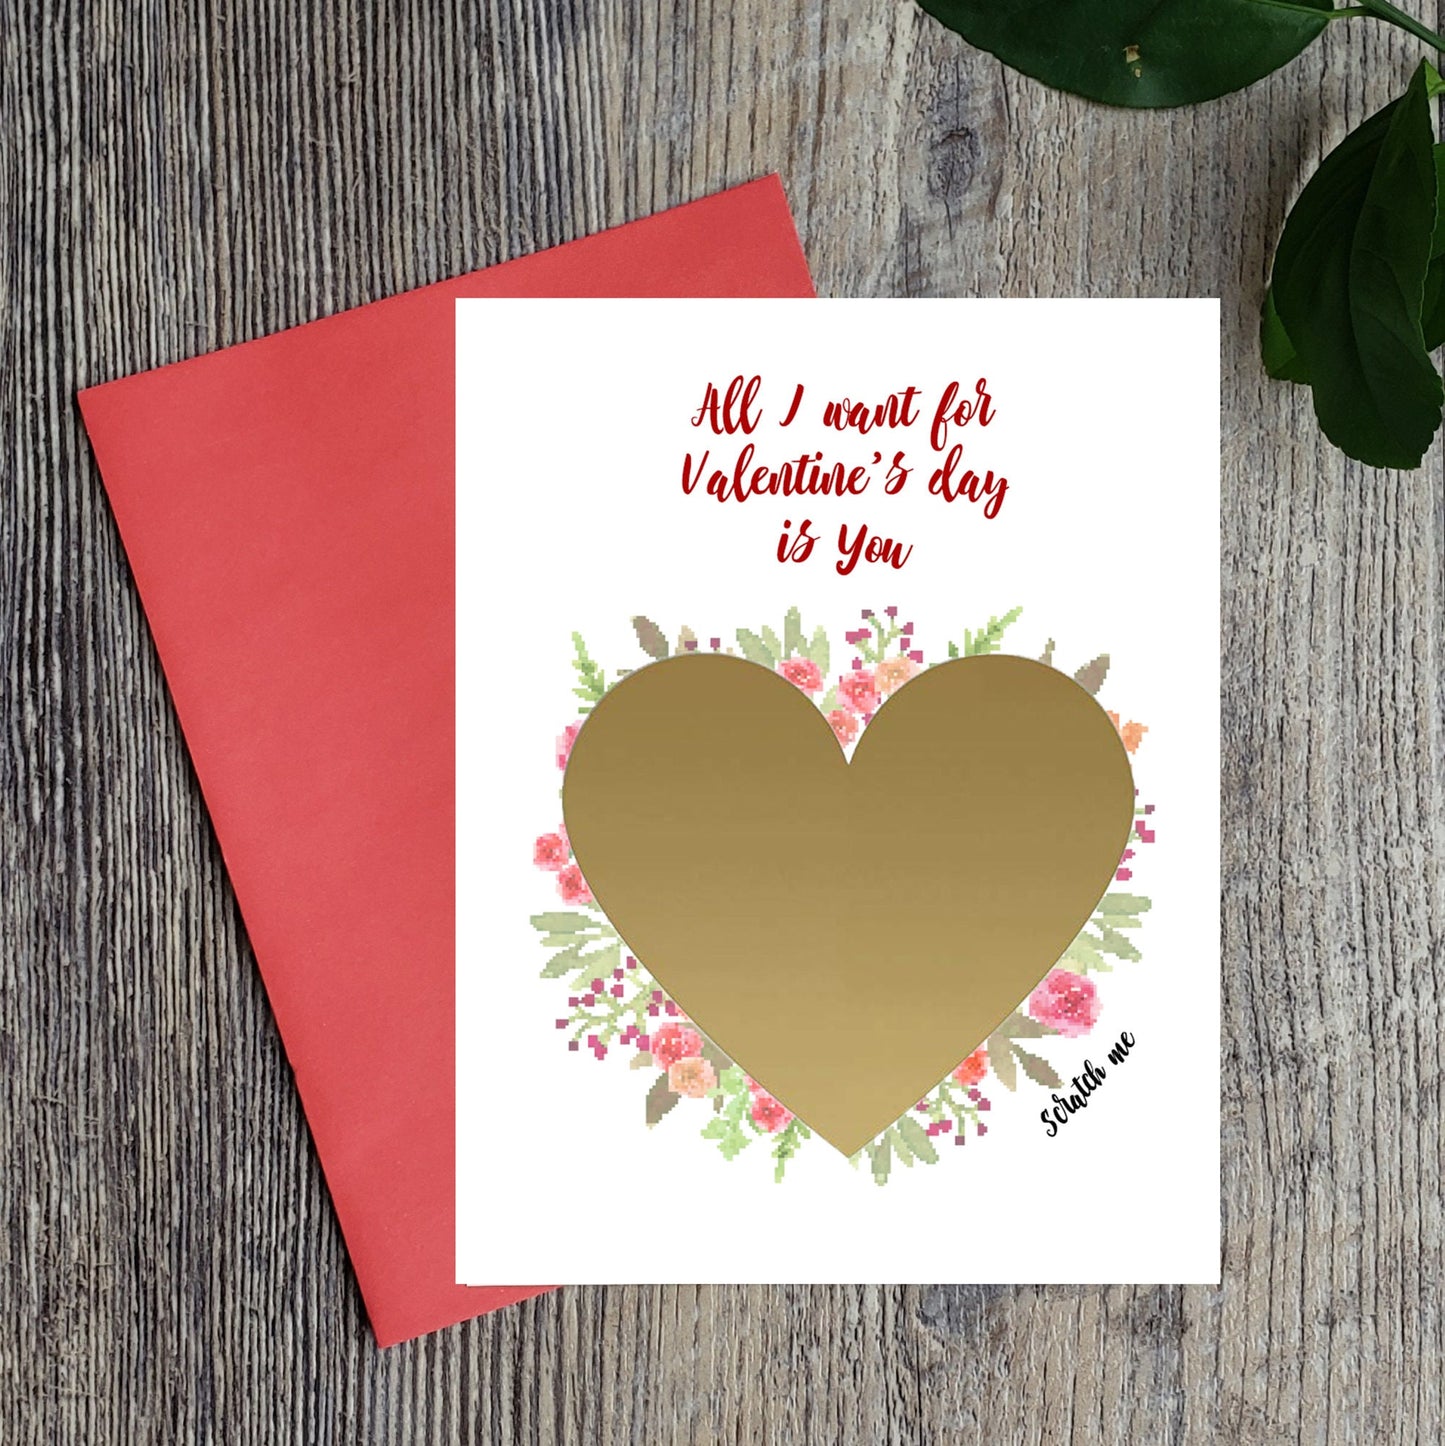 Valentine's Day Card - All I want for Valentine's day is...